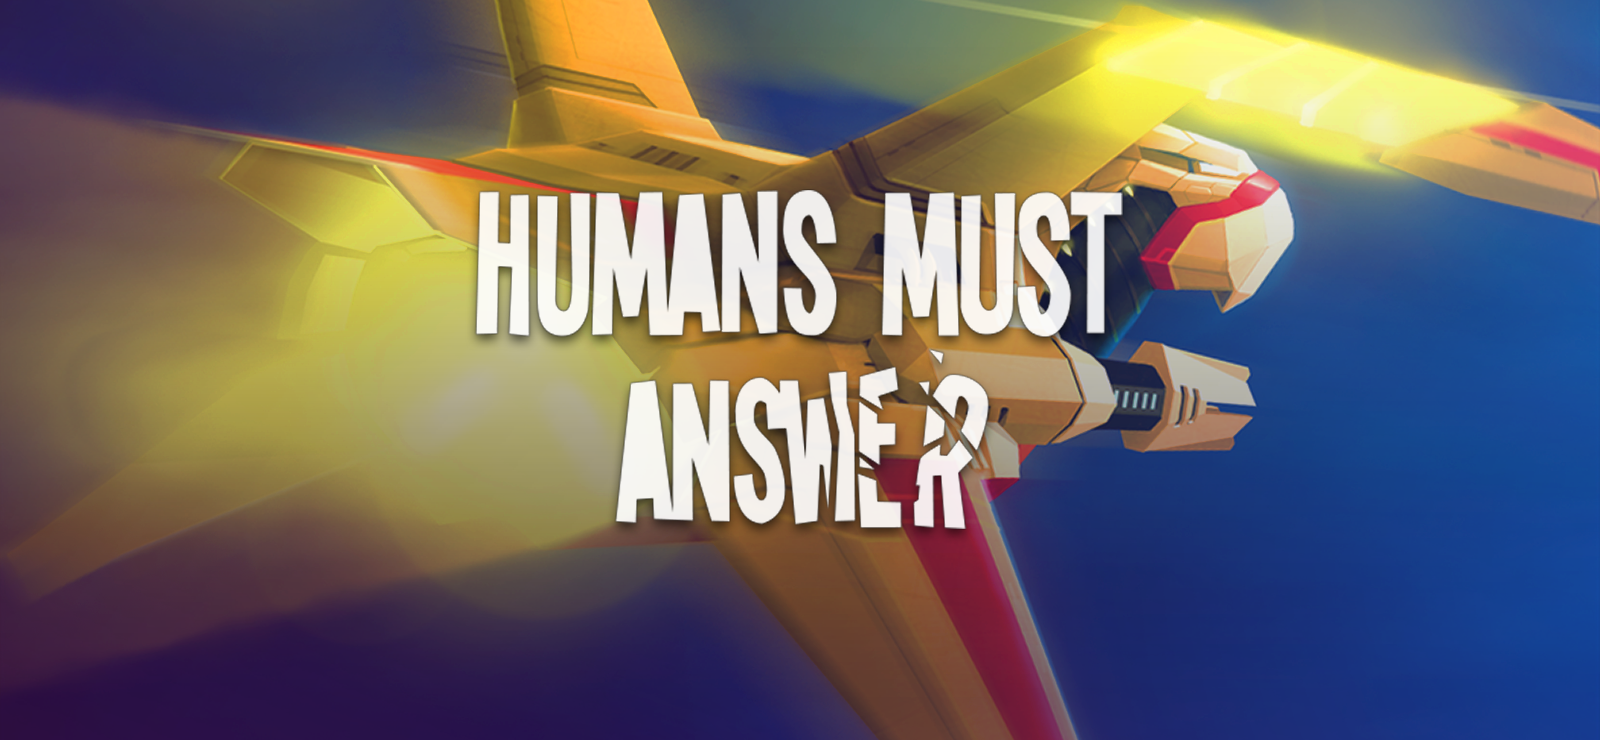 Humans Must Answer